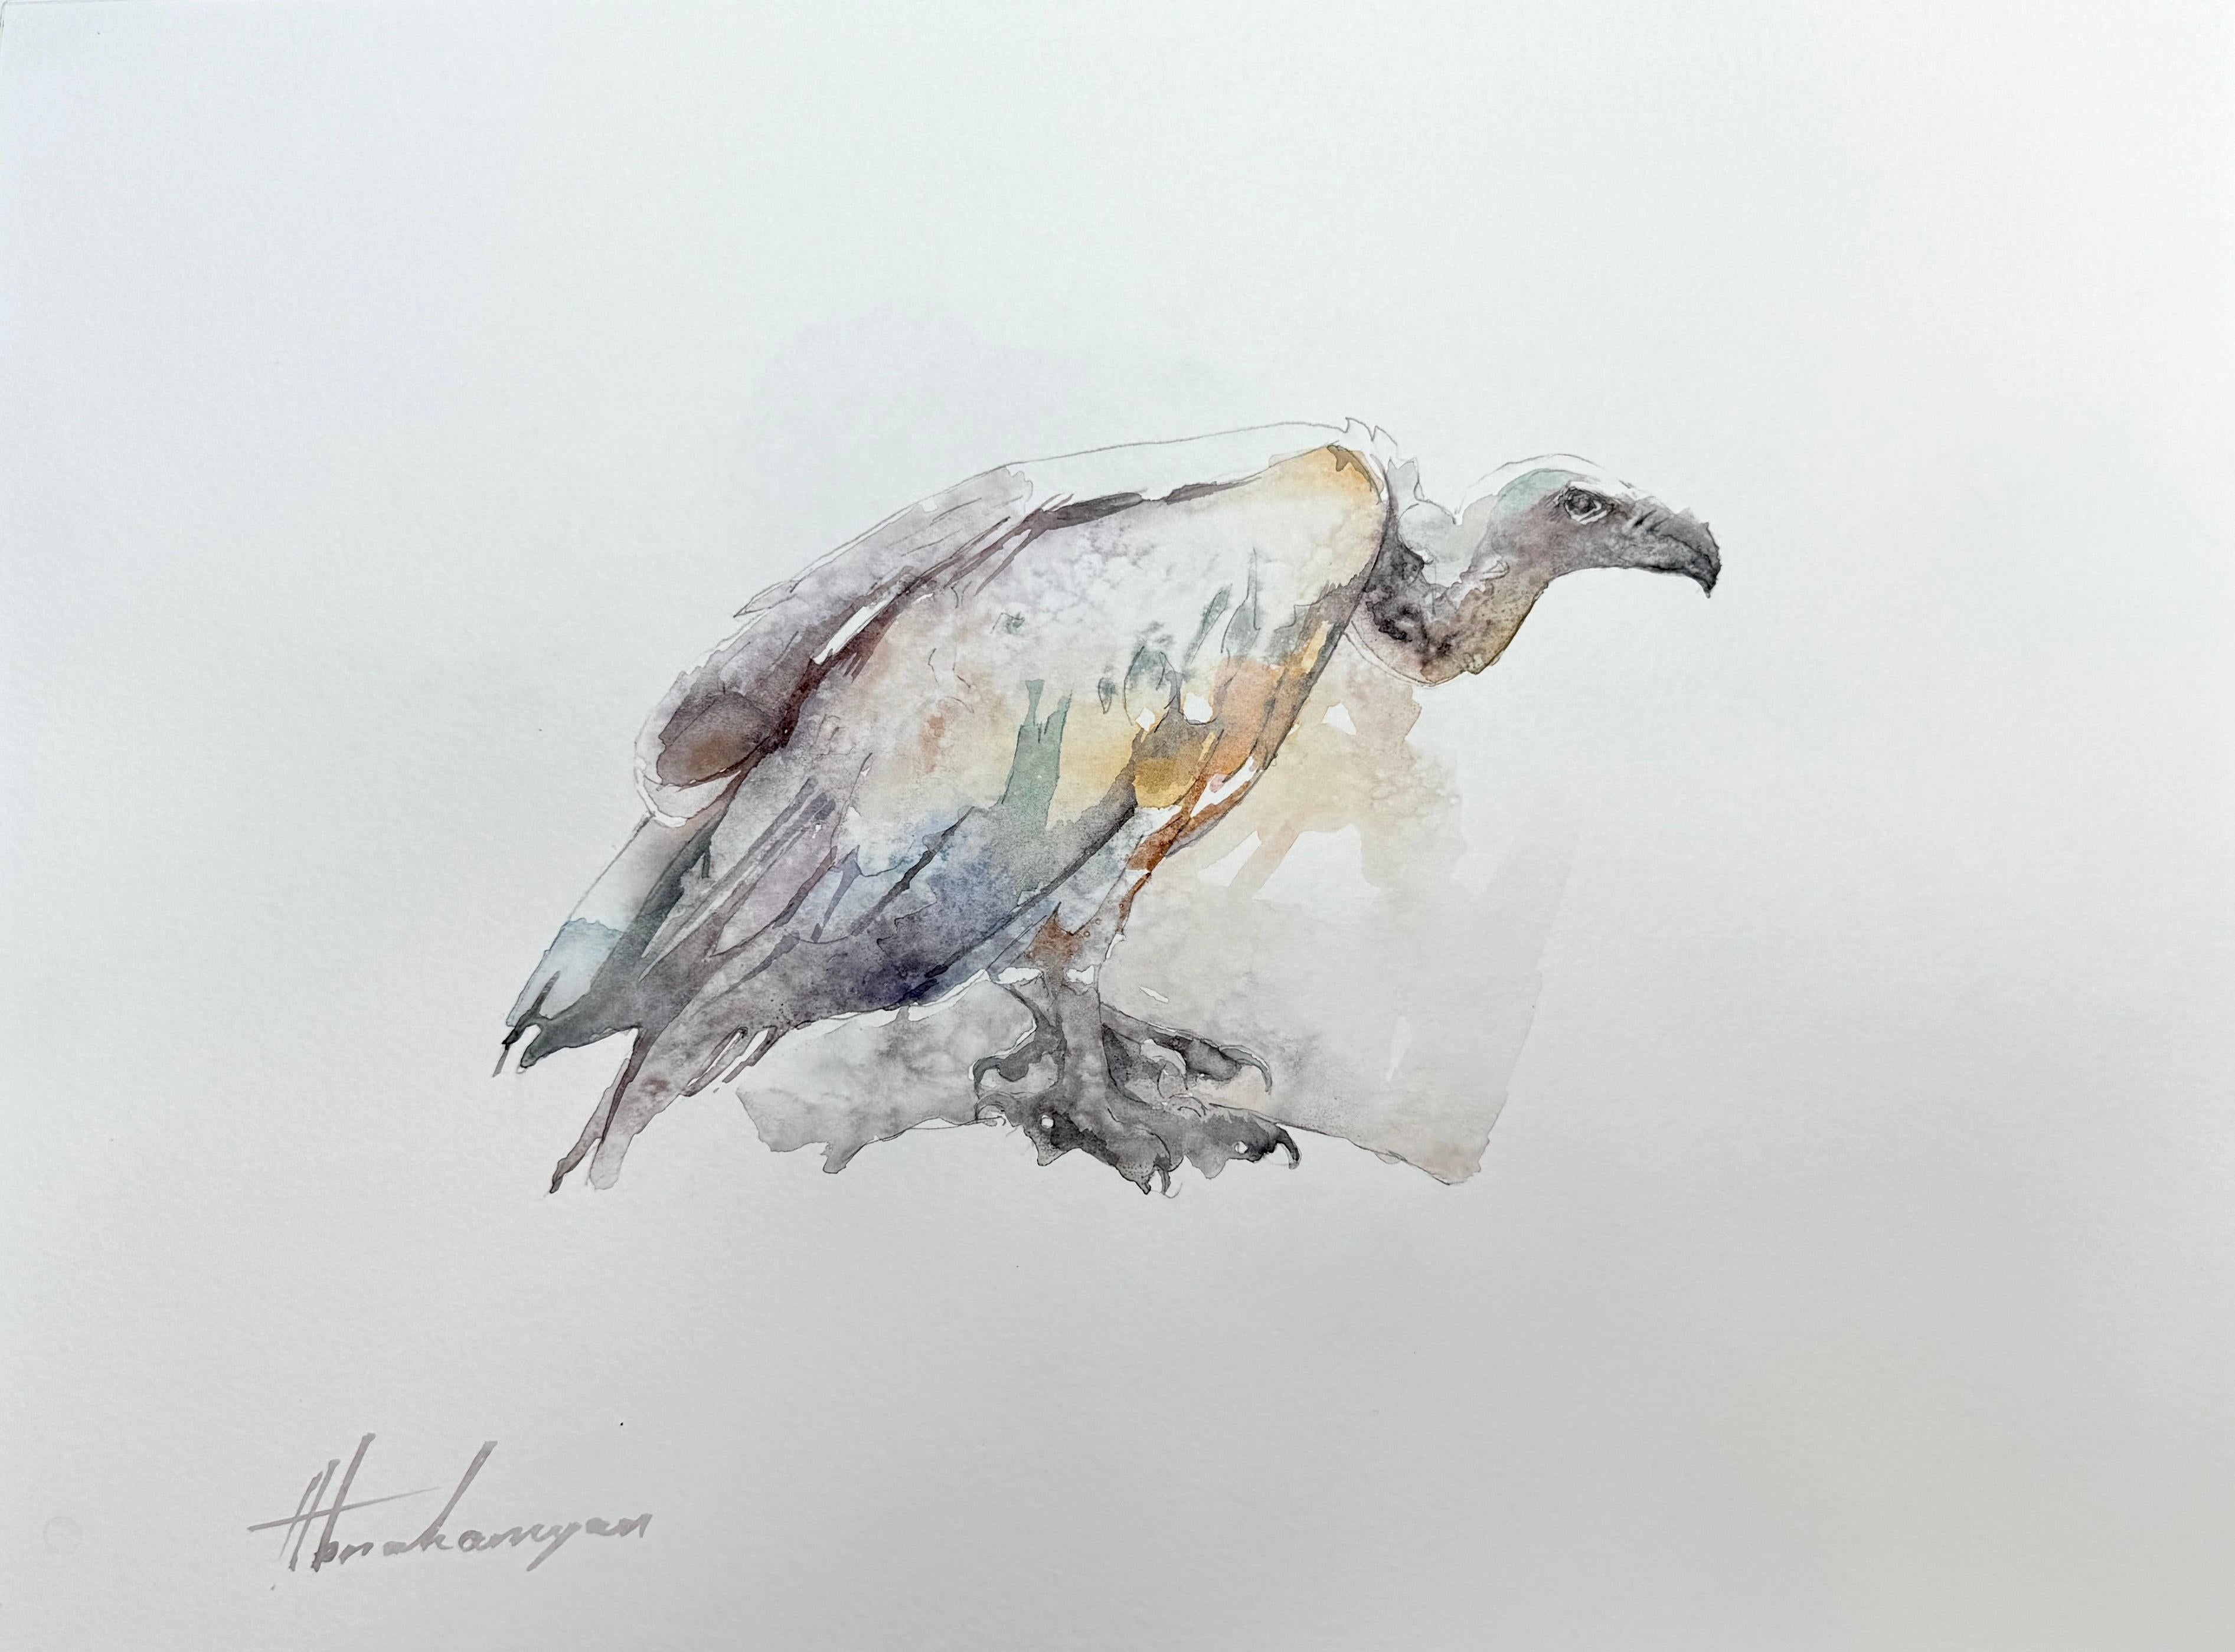 Artyom Abrahamyan Animal Art - Vulture, Bird, Watercolor on Paper, Handmade Painting, One of a Kind